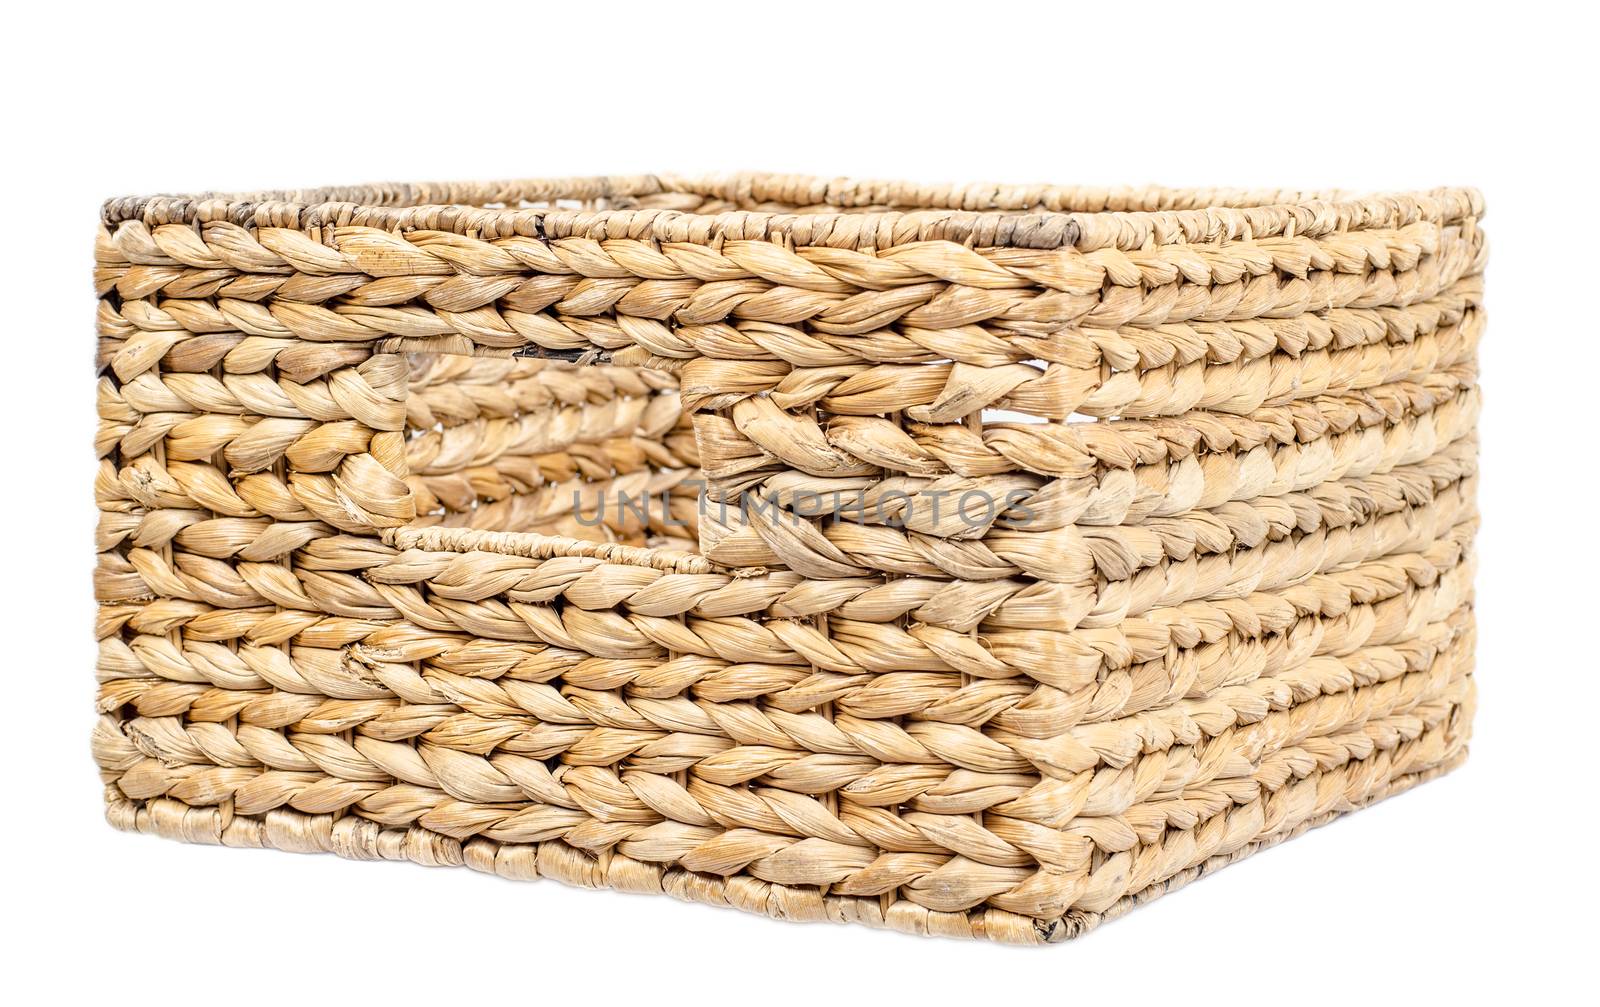 box wicker basket in the traditional Russian style